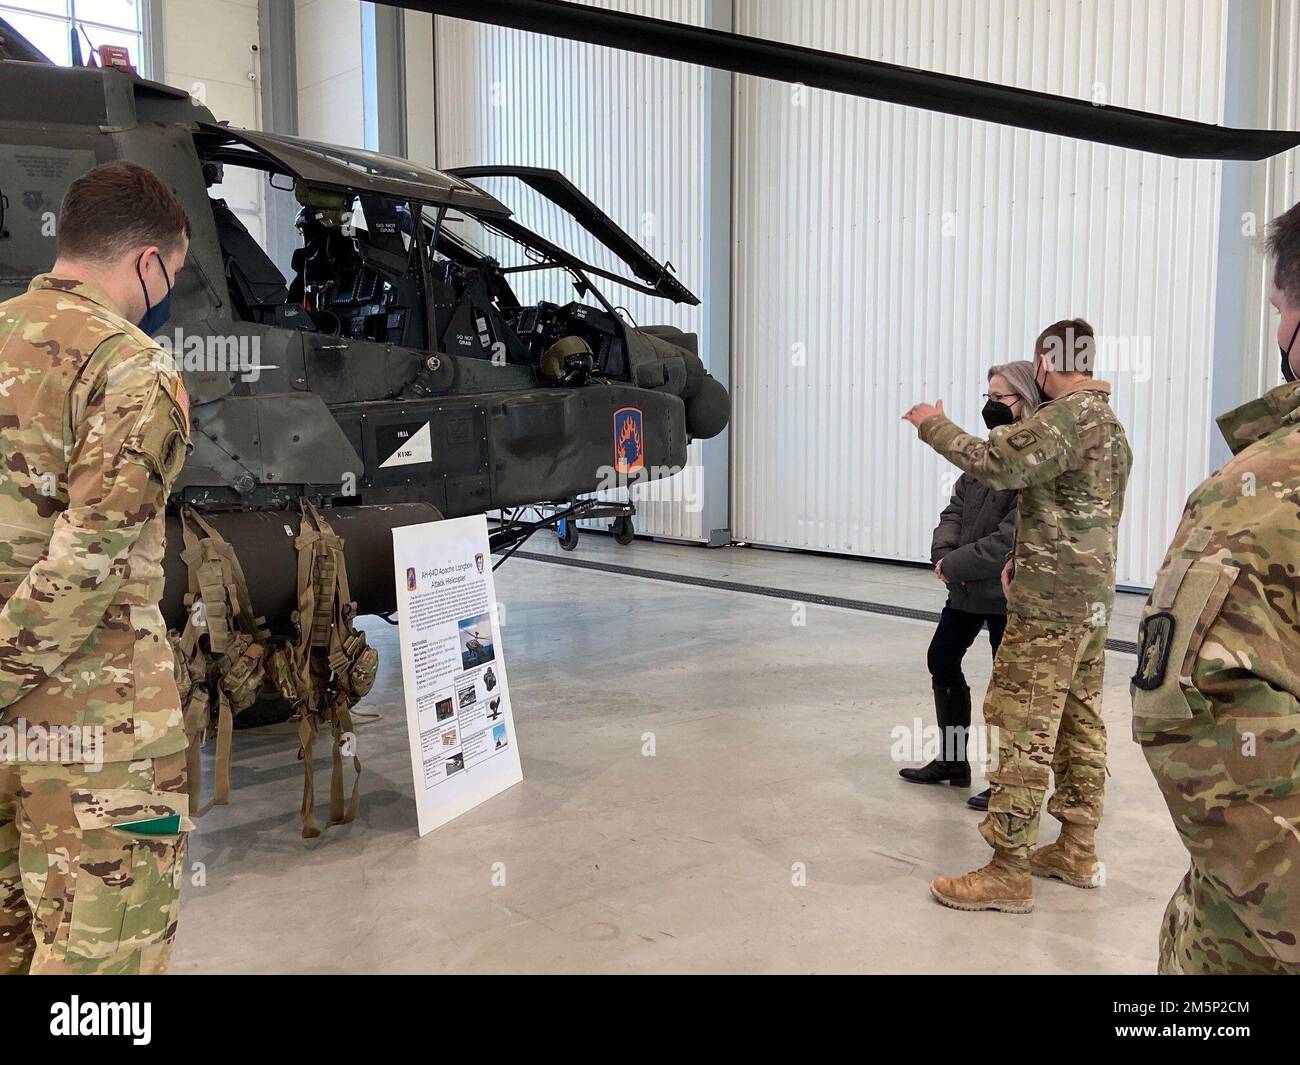 Chief Warrant Officer 2 Justin Schriener, 152B Apache Pilot, Bravo Company 1-3rd Attack Battalion, provides an AH-64D capabilities brief to Ruta Elvikis, Deputy Chief of Mission, U.S. Embassy Riga during her visit on 27 February 2022. (U.S. Army Photo: 1LT Lisabeth Quinn) Stock Photo